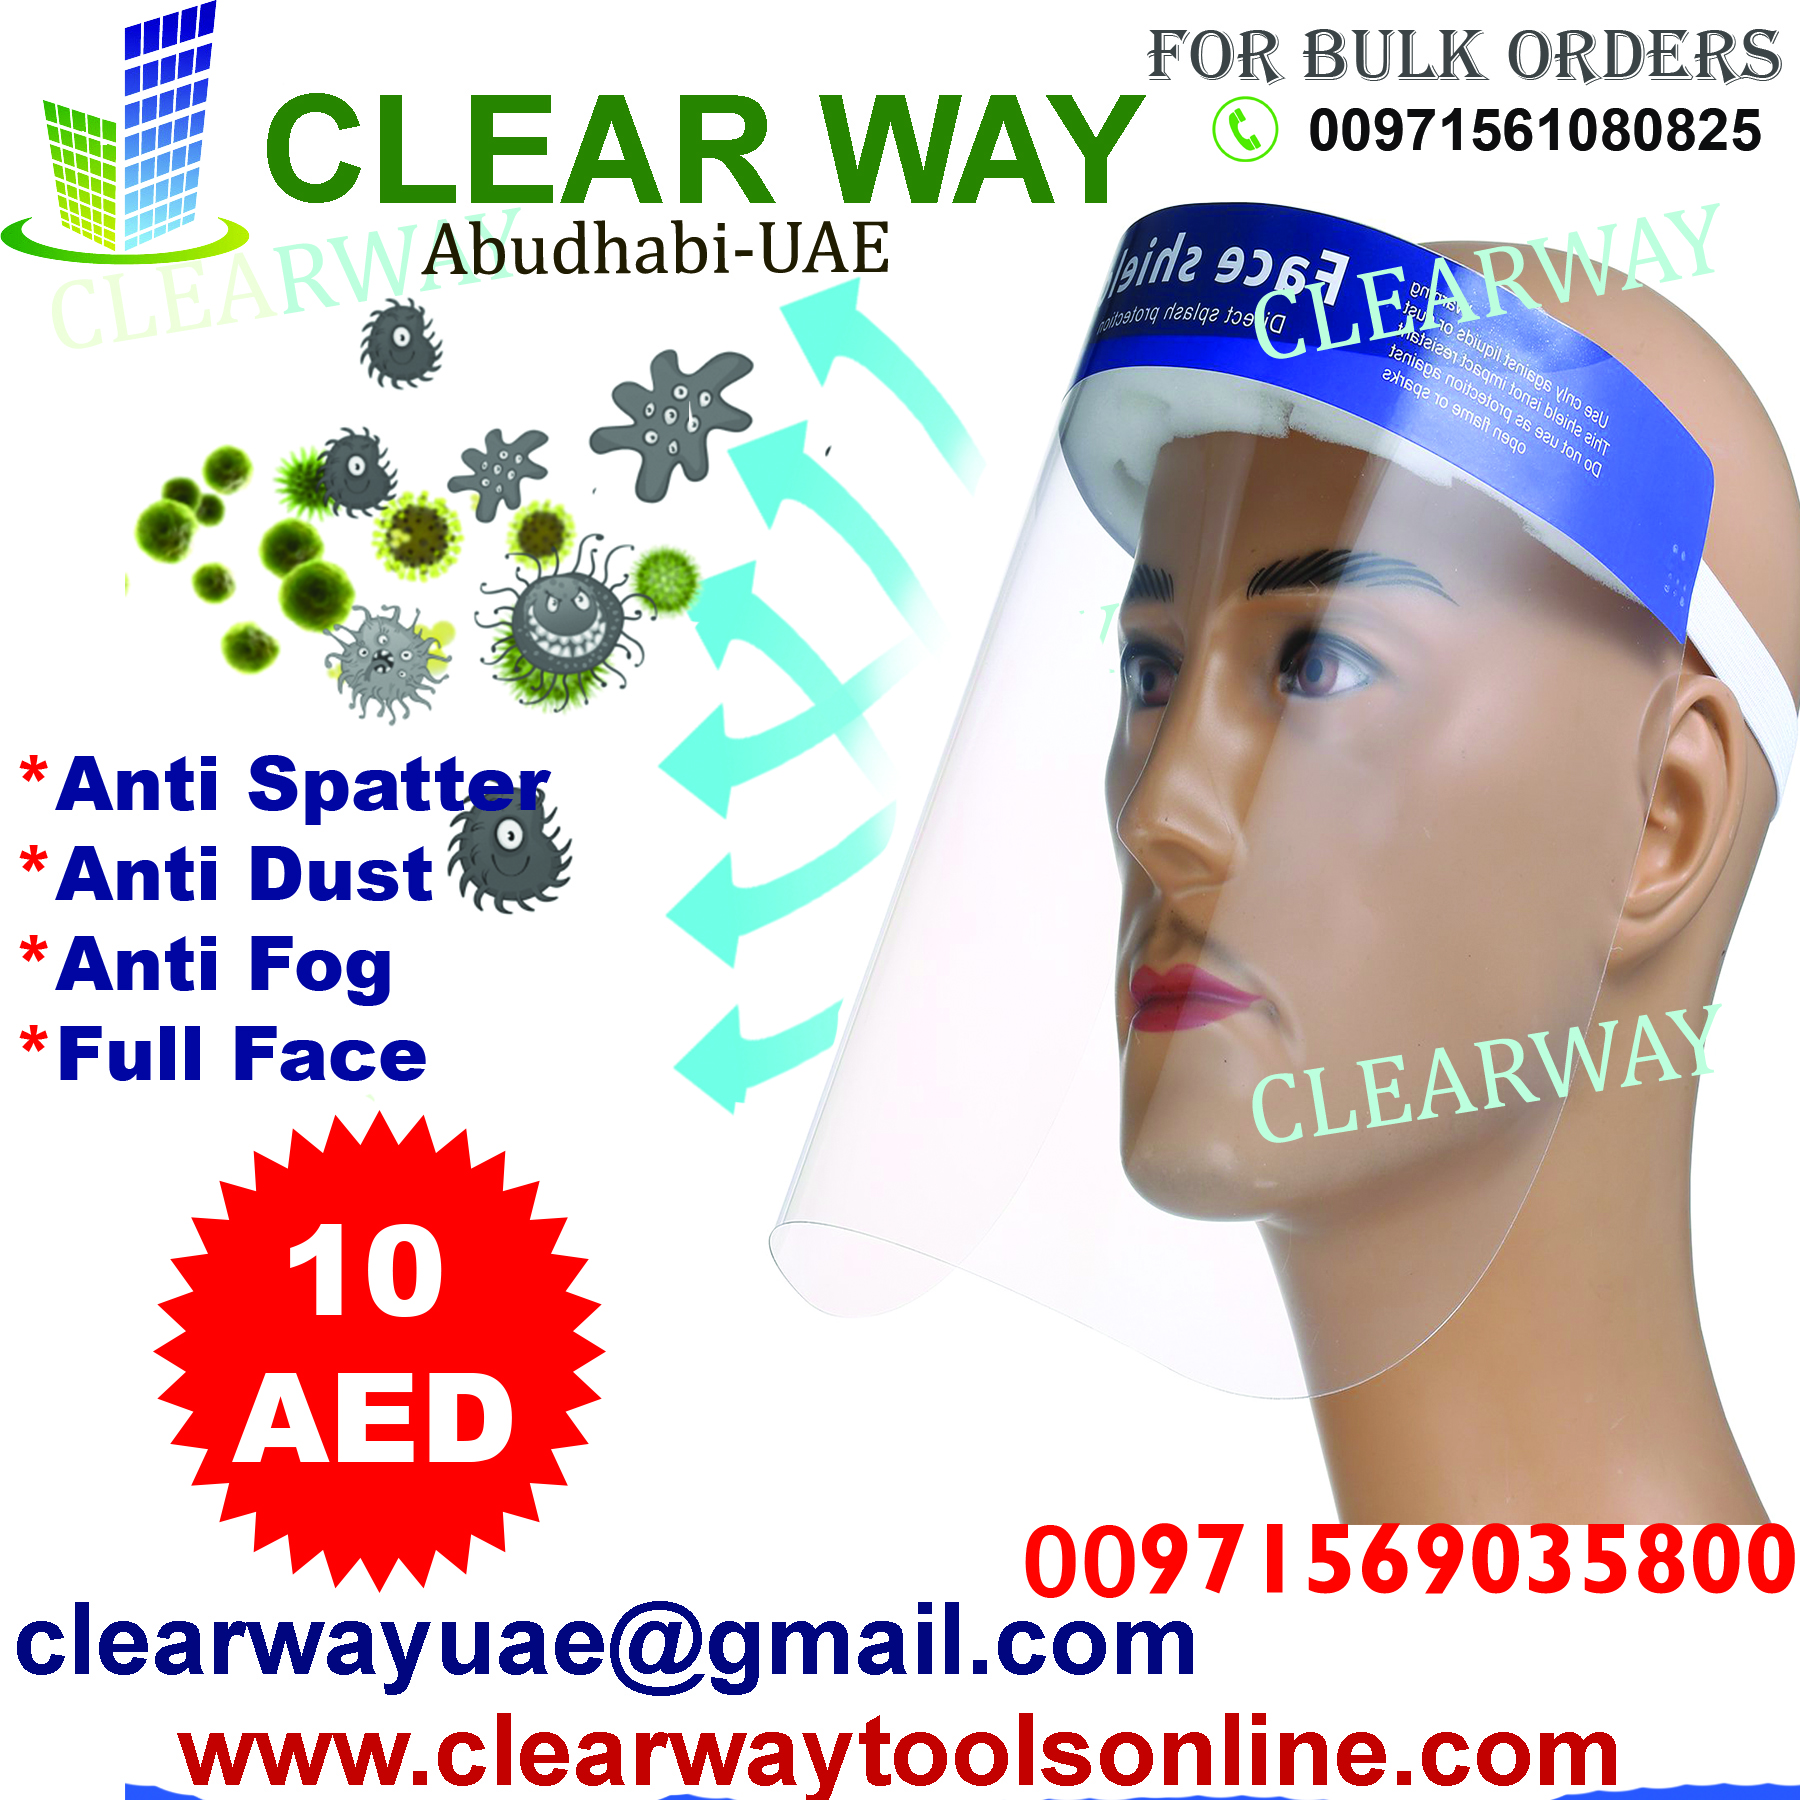 FACE SHIELD DEALER IN MUSSAFAH , ABUDHABI , UAE BY CLEARWAY